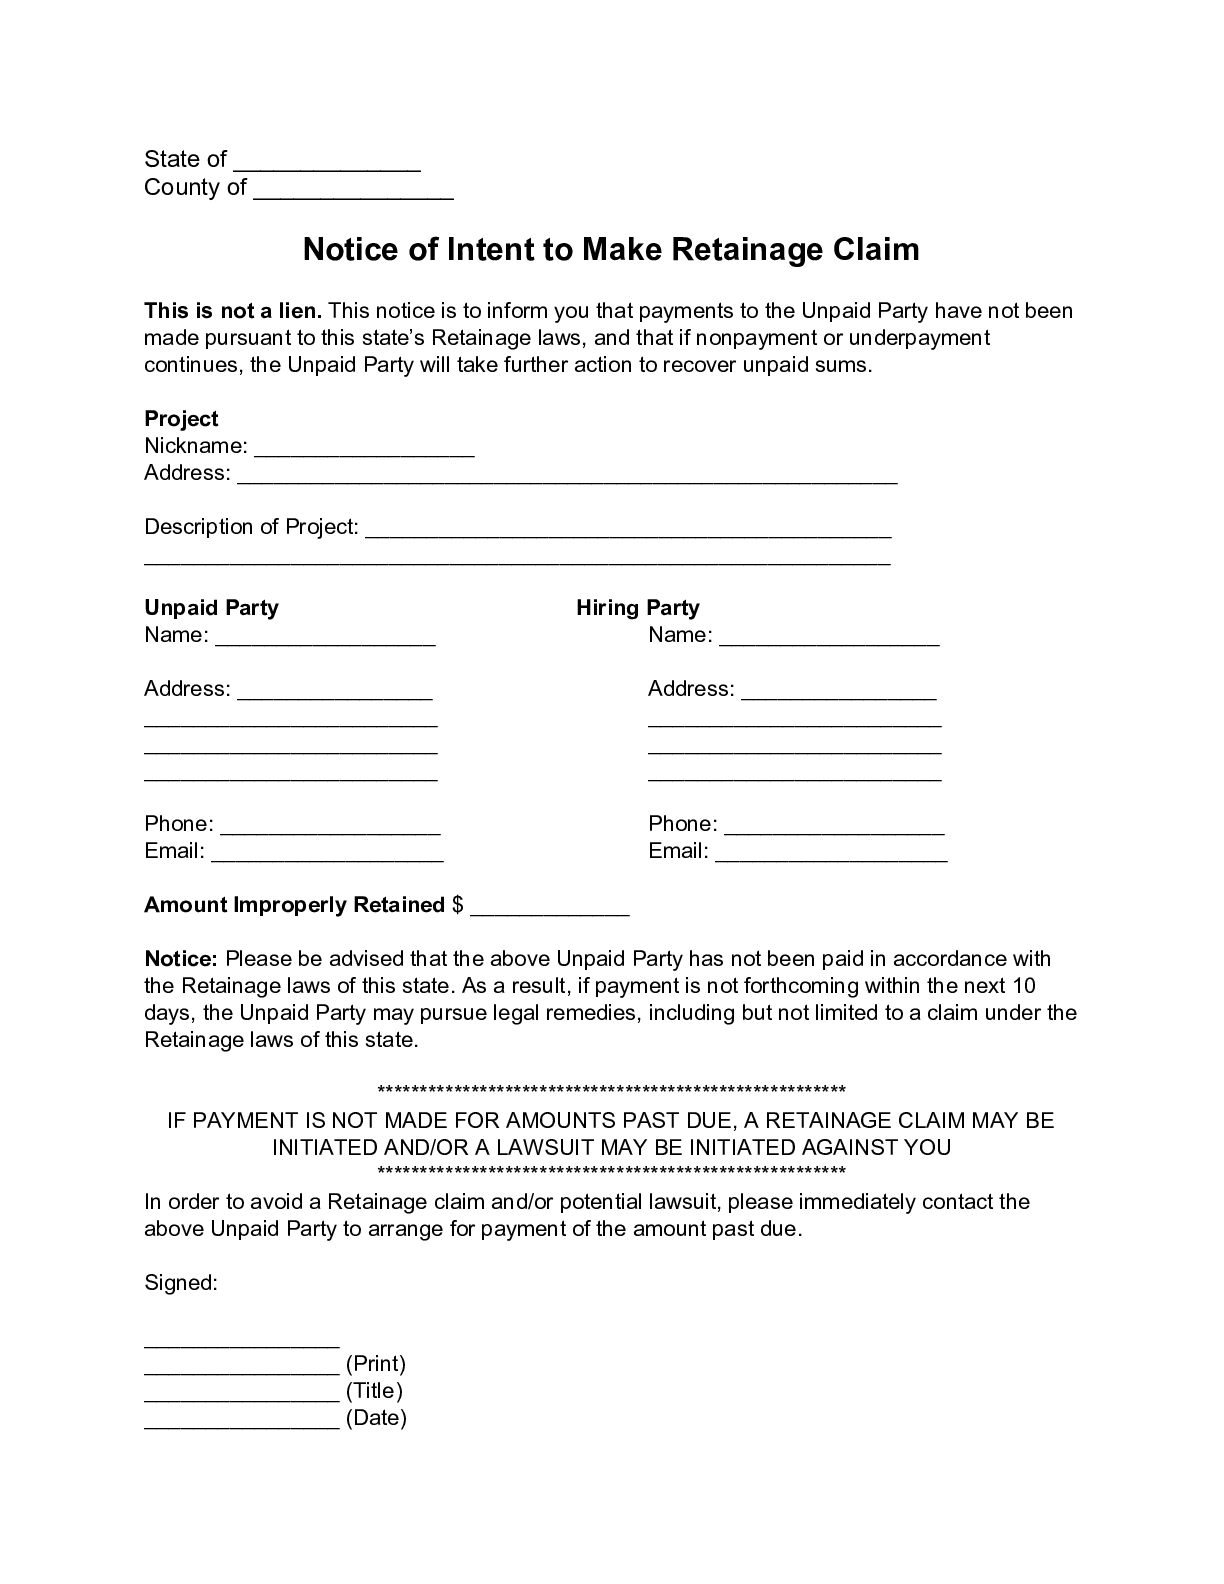 Notice of Intent to Make Retainage Claim Form